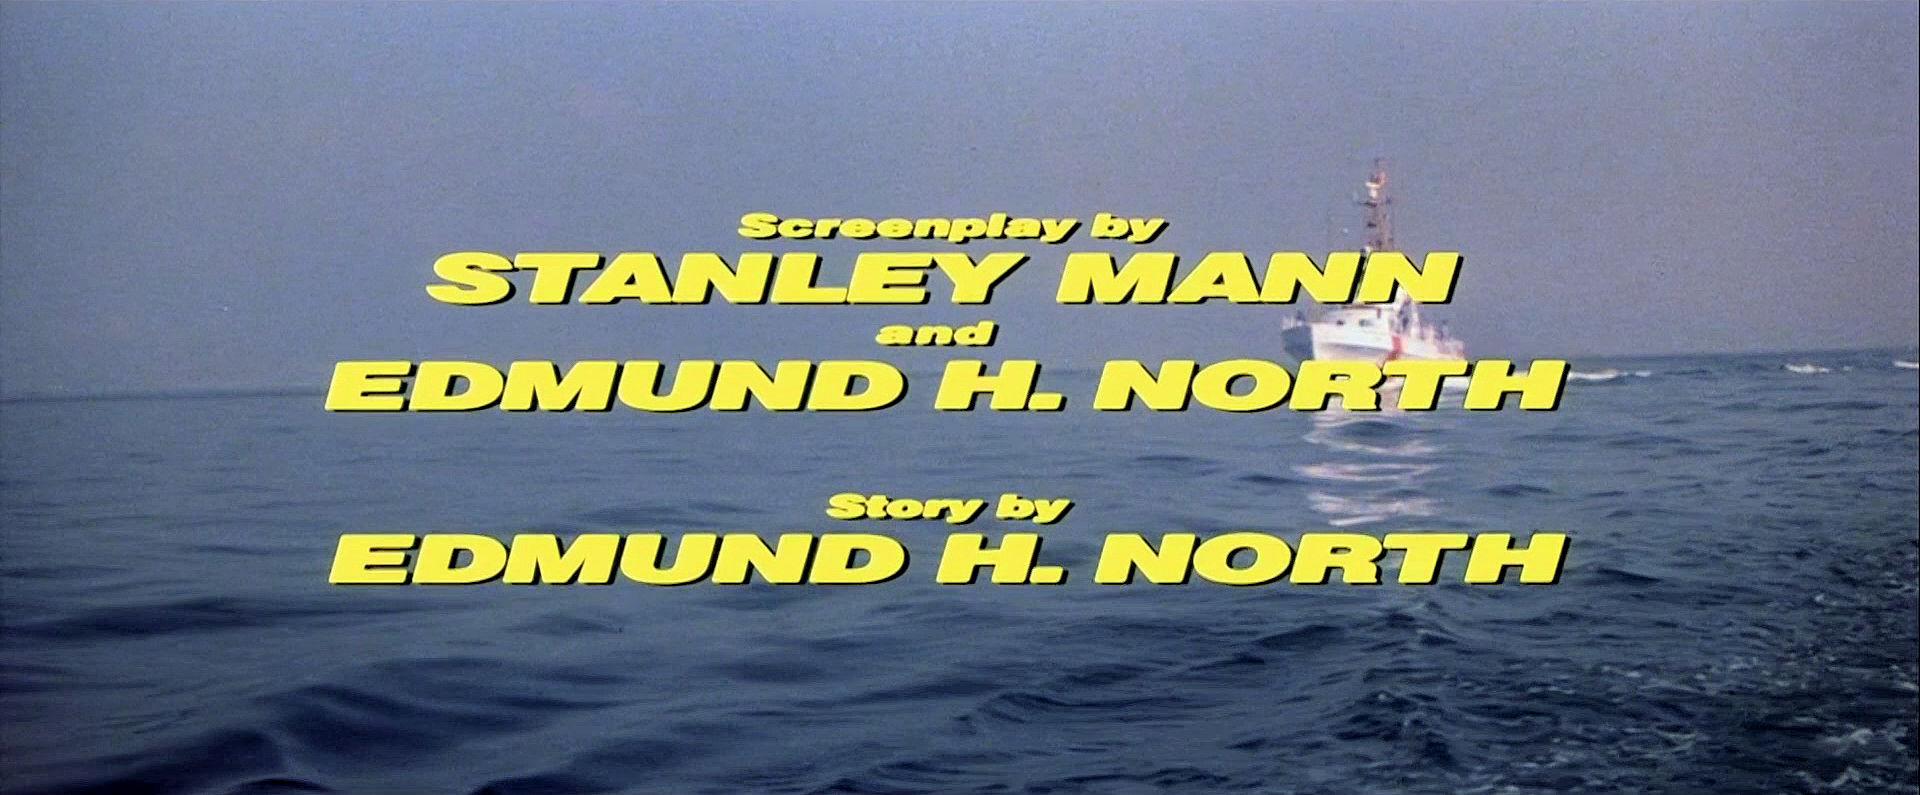 Main title from Meteor (1979) (18). Screenplay by Stanley Mann, Edmund H North